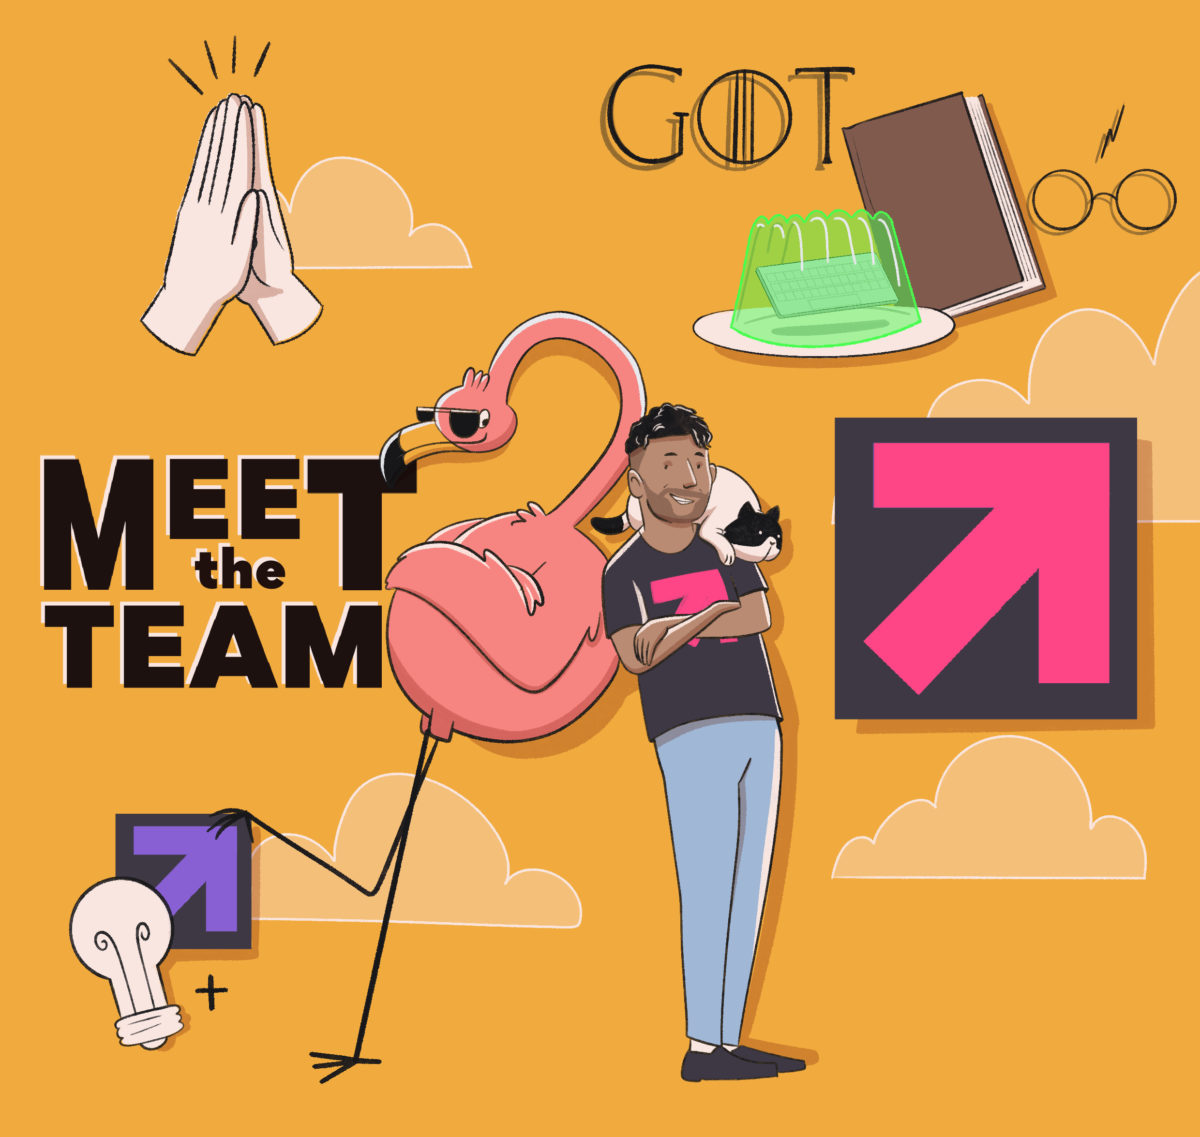 Illustration of a man with a cat standing next to a flamingo, surrounded by various icons including a high-five, a book, a cake, and creative symbols, against a yellow background with the text "meet the team.